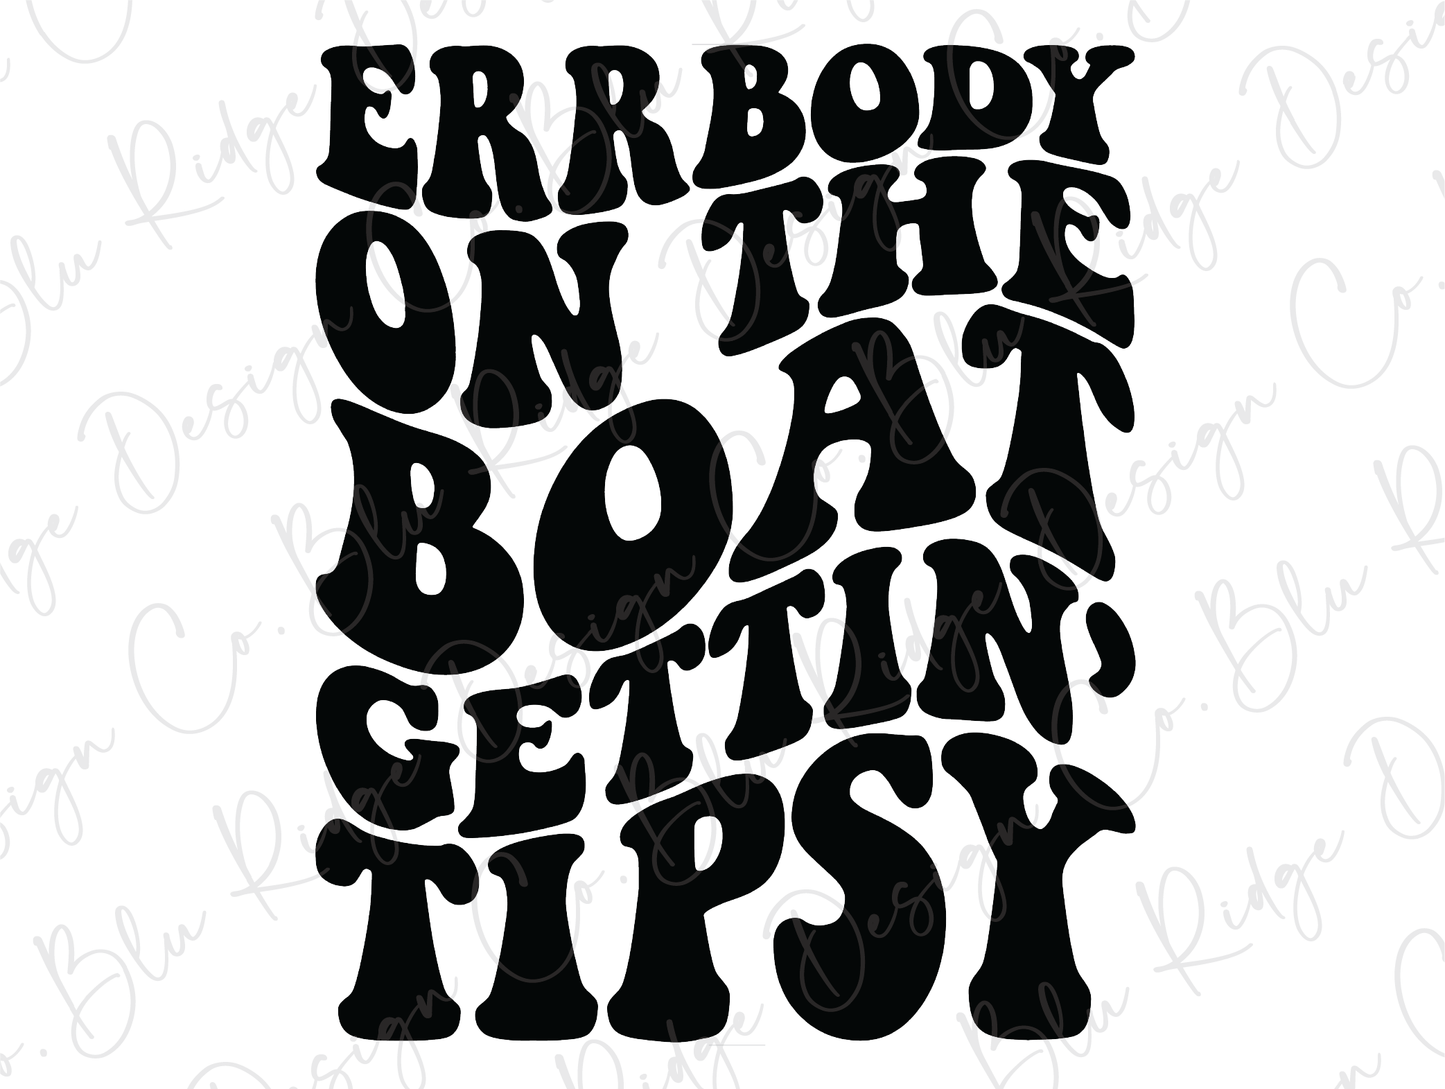 Errbody On The Boat Gettin' Tipsy Direct to Film (DTF) Transfer